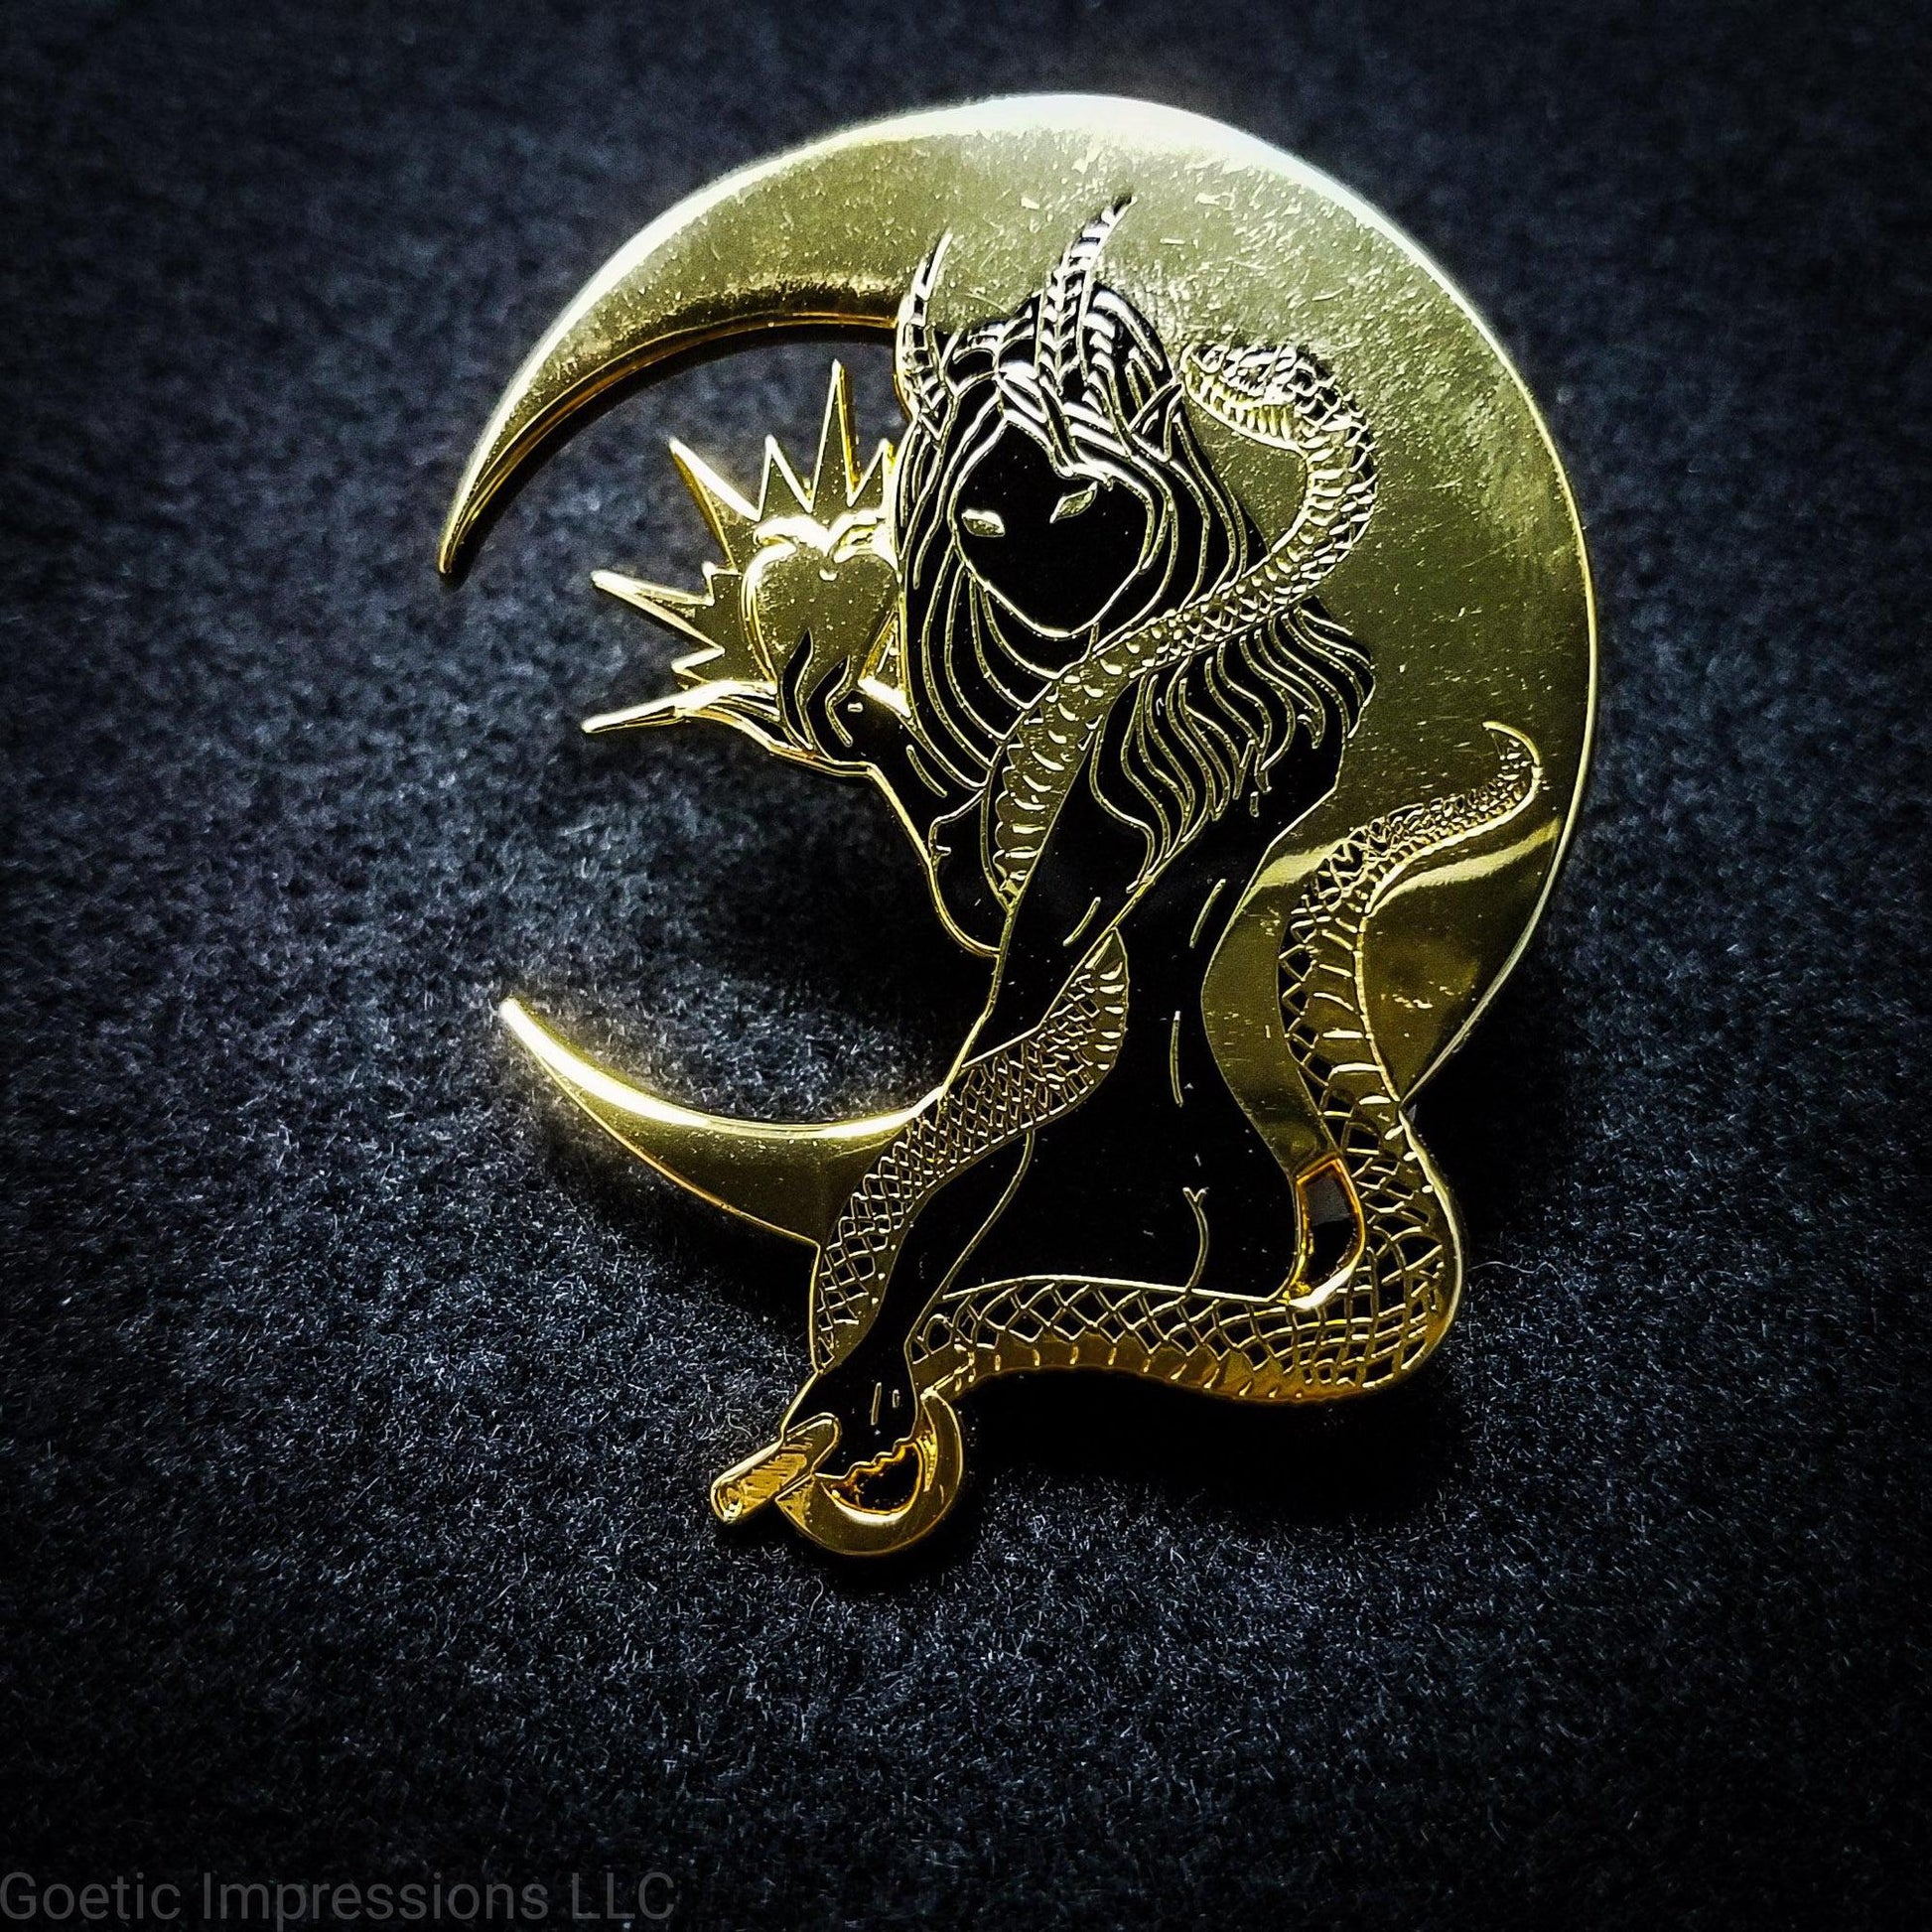 A black and gold hard enamel pin of Lilith. Lilith is holding a shining apple in one hand and a rod and circle in the other. Her one arm is coiled with a serpent. A cresent moon is behind her.